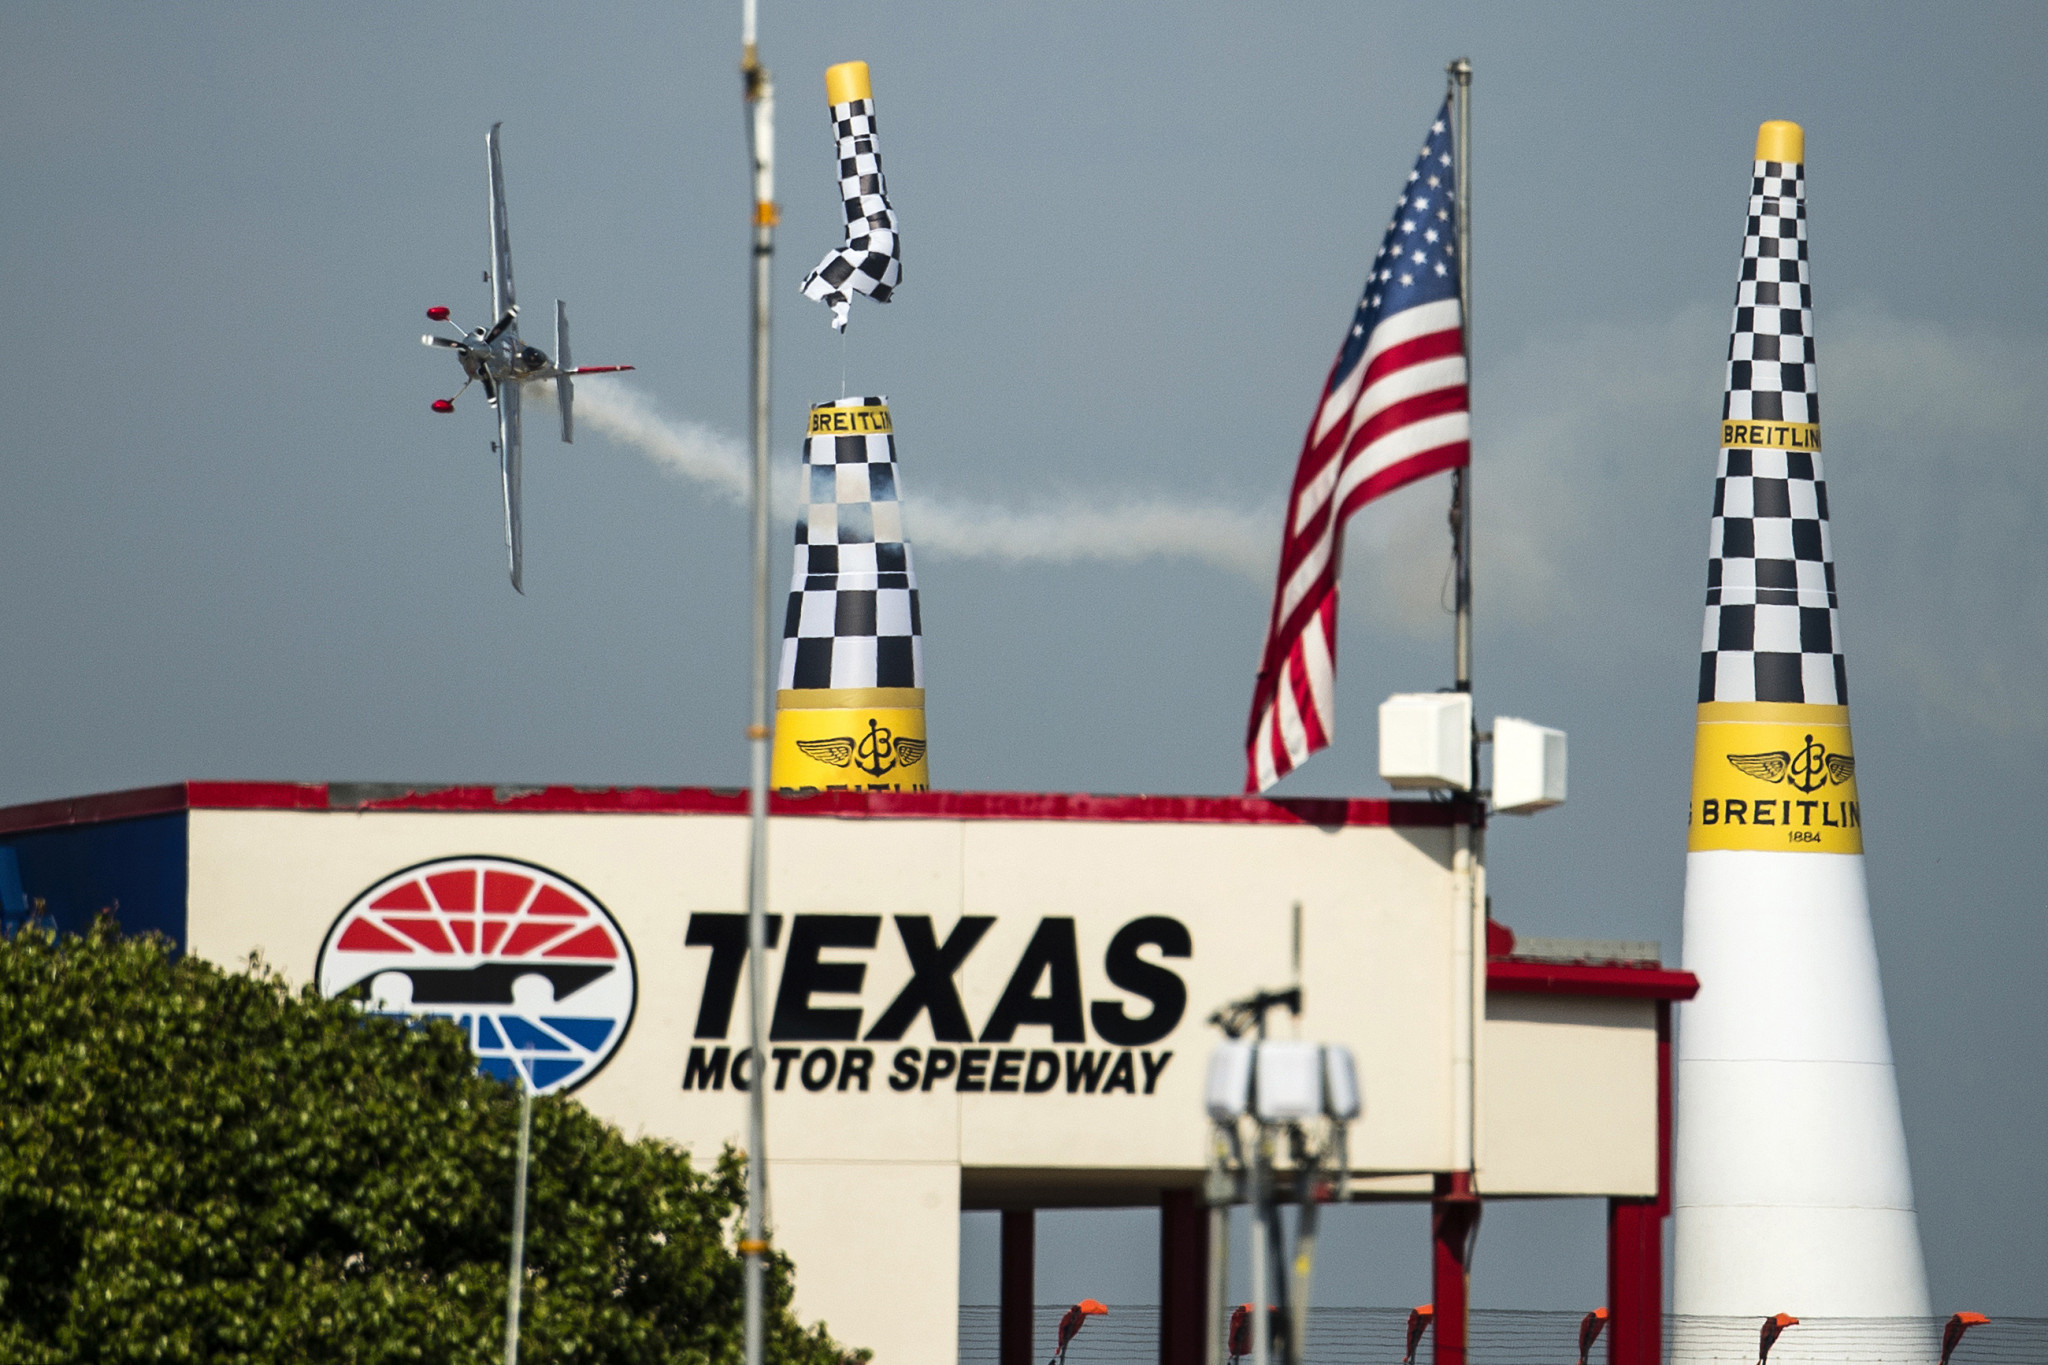 Red Bull Air Race World Championship season set for dramatic finale in Texas